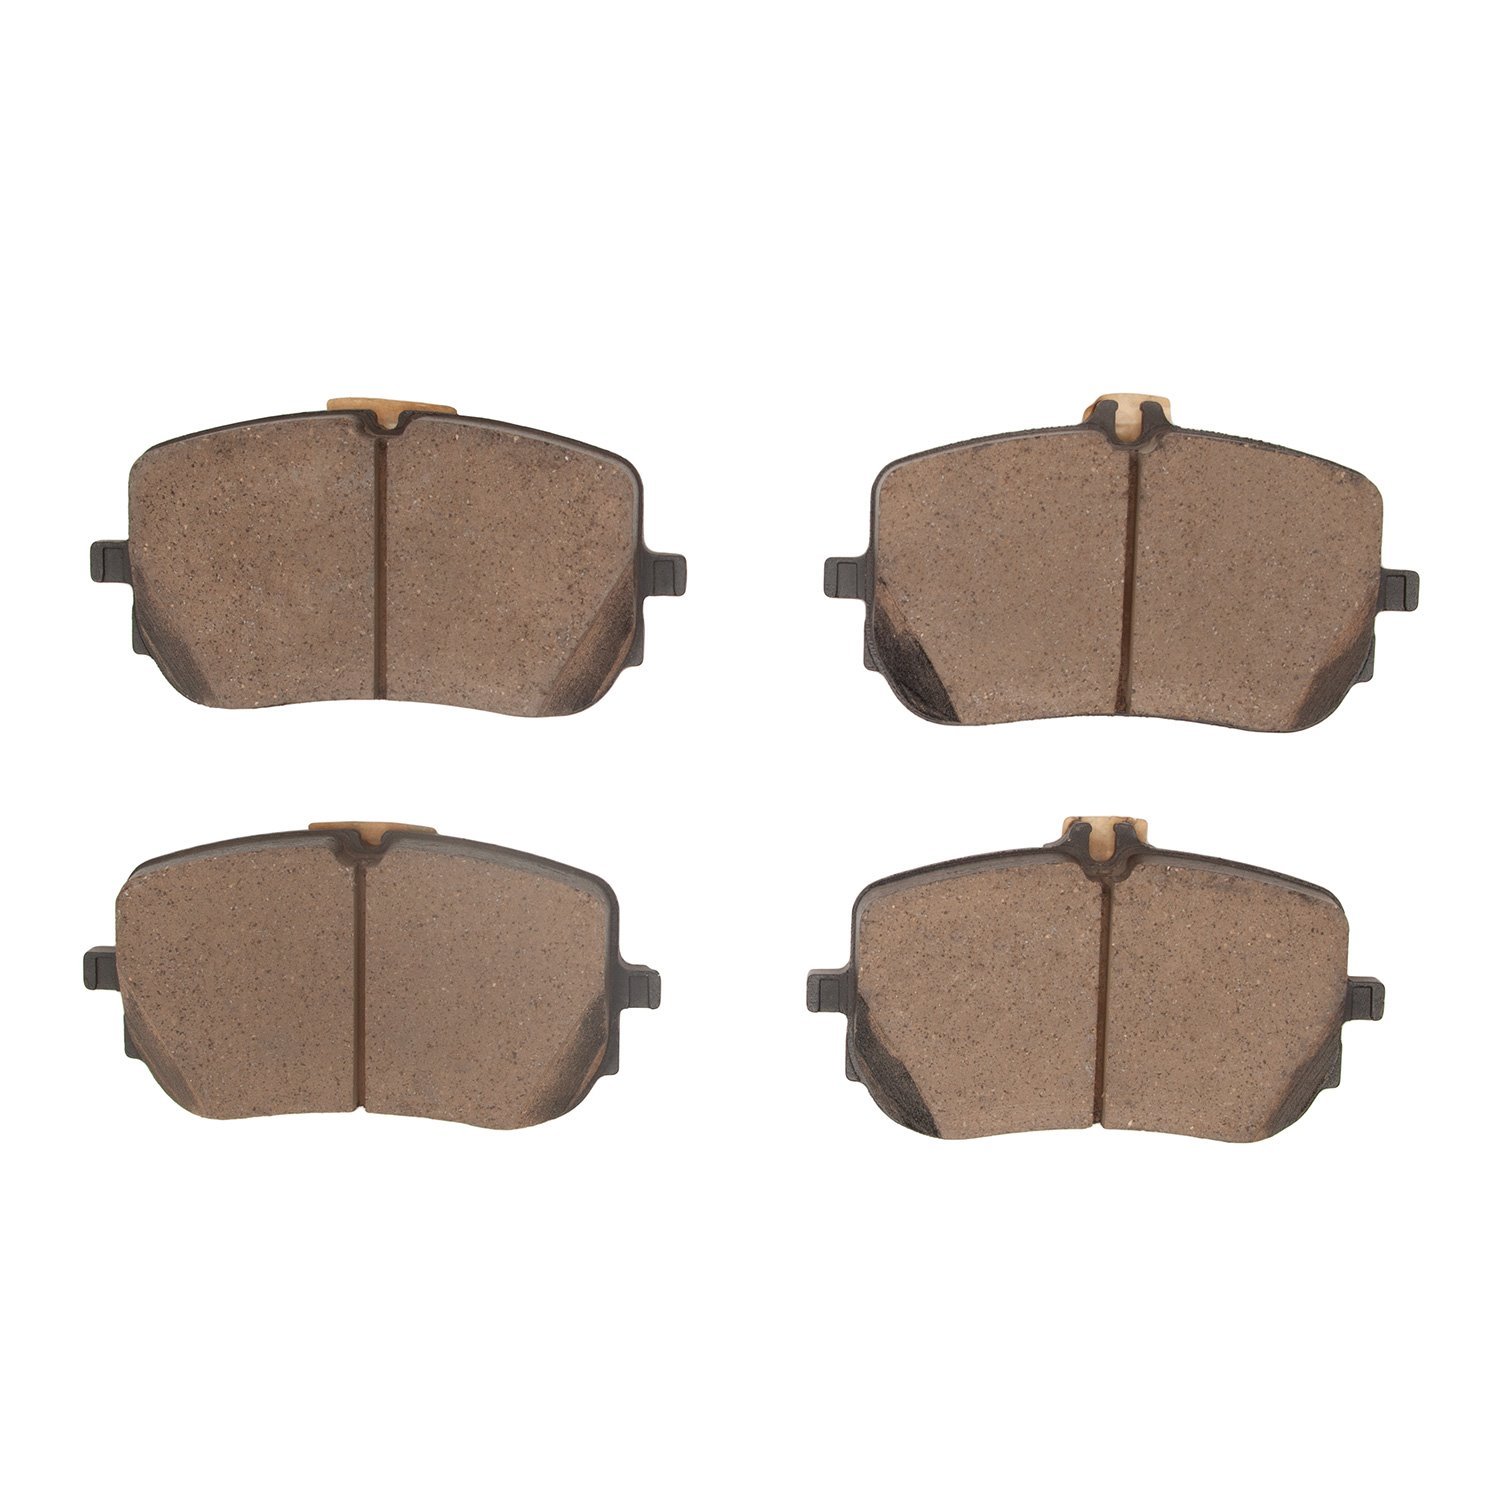 1551-2206-00 5000 Advanced Ceramic Brake Pads, Fits Select Mercedes-Benz, Position: Front